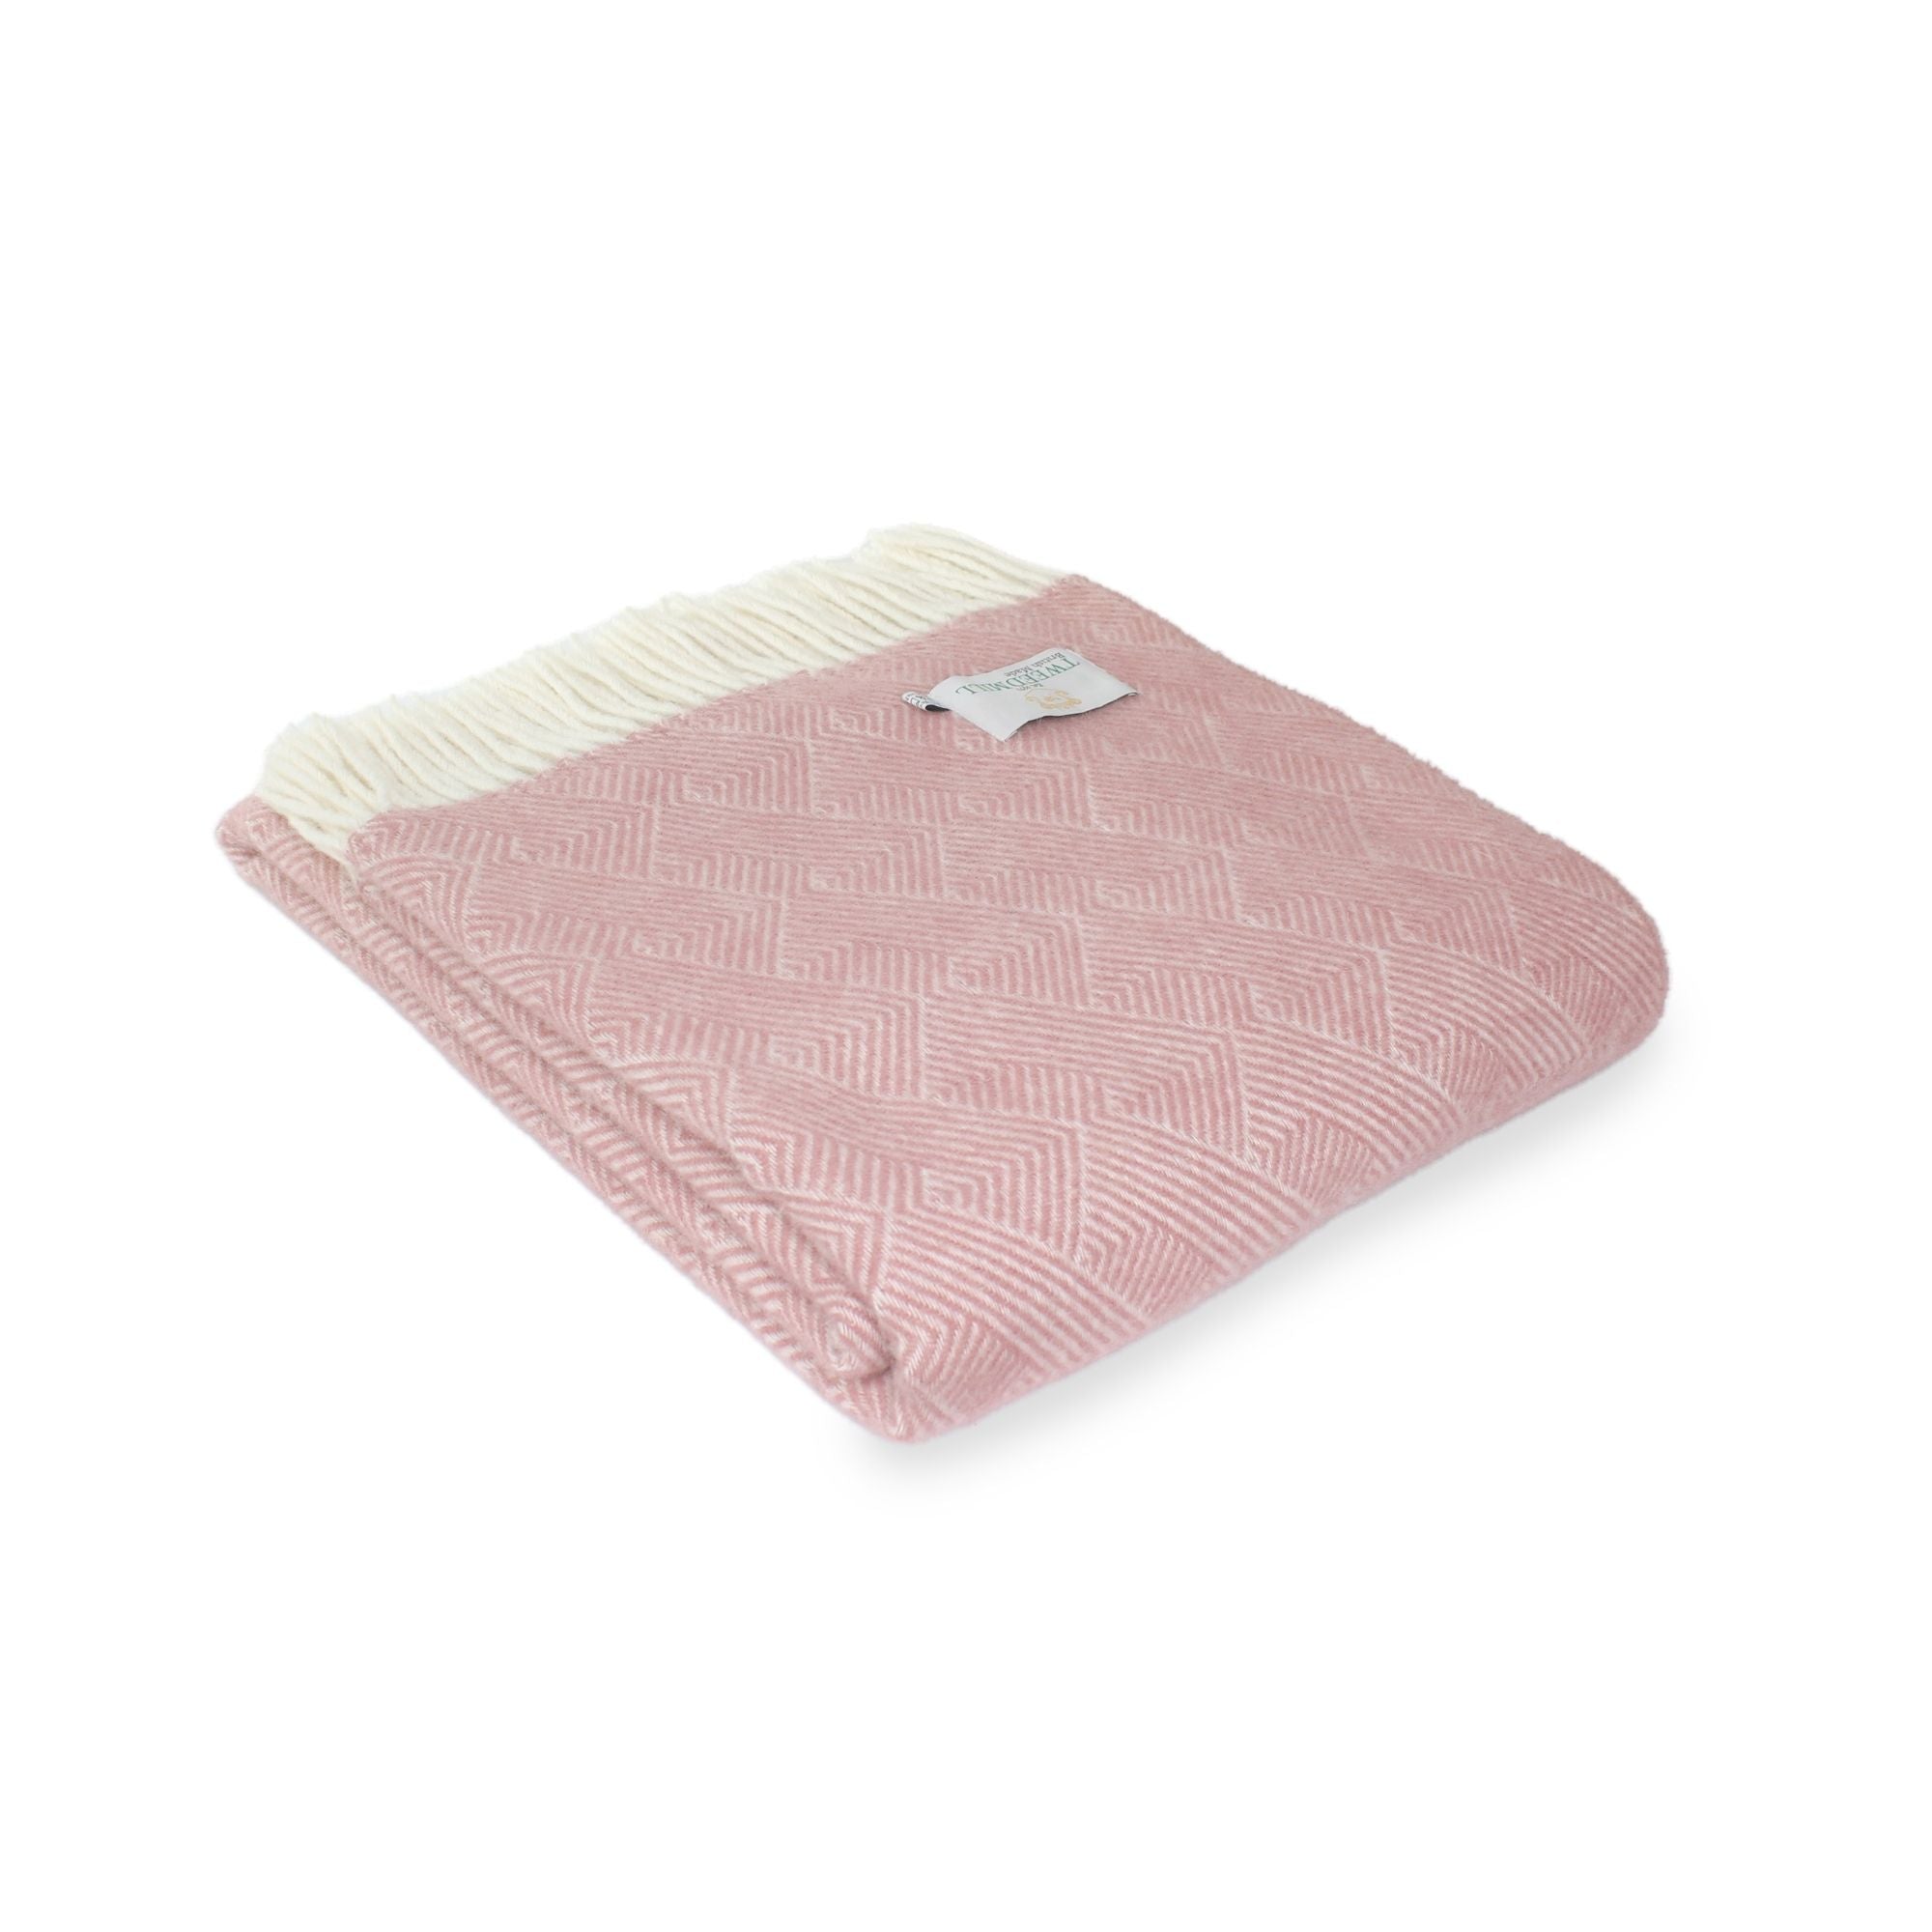 Smokey Rose Red 100% British Pure New Wool Delamere Bed Throw Blanket (183cm x 150cm)